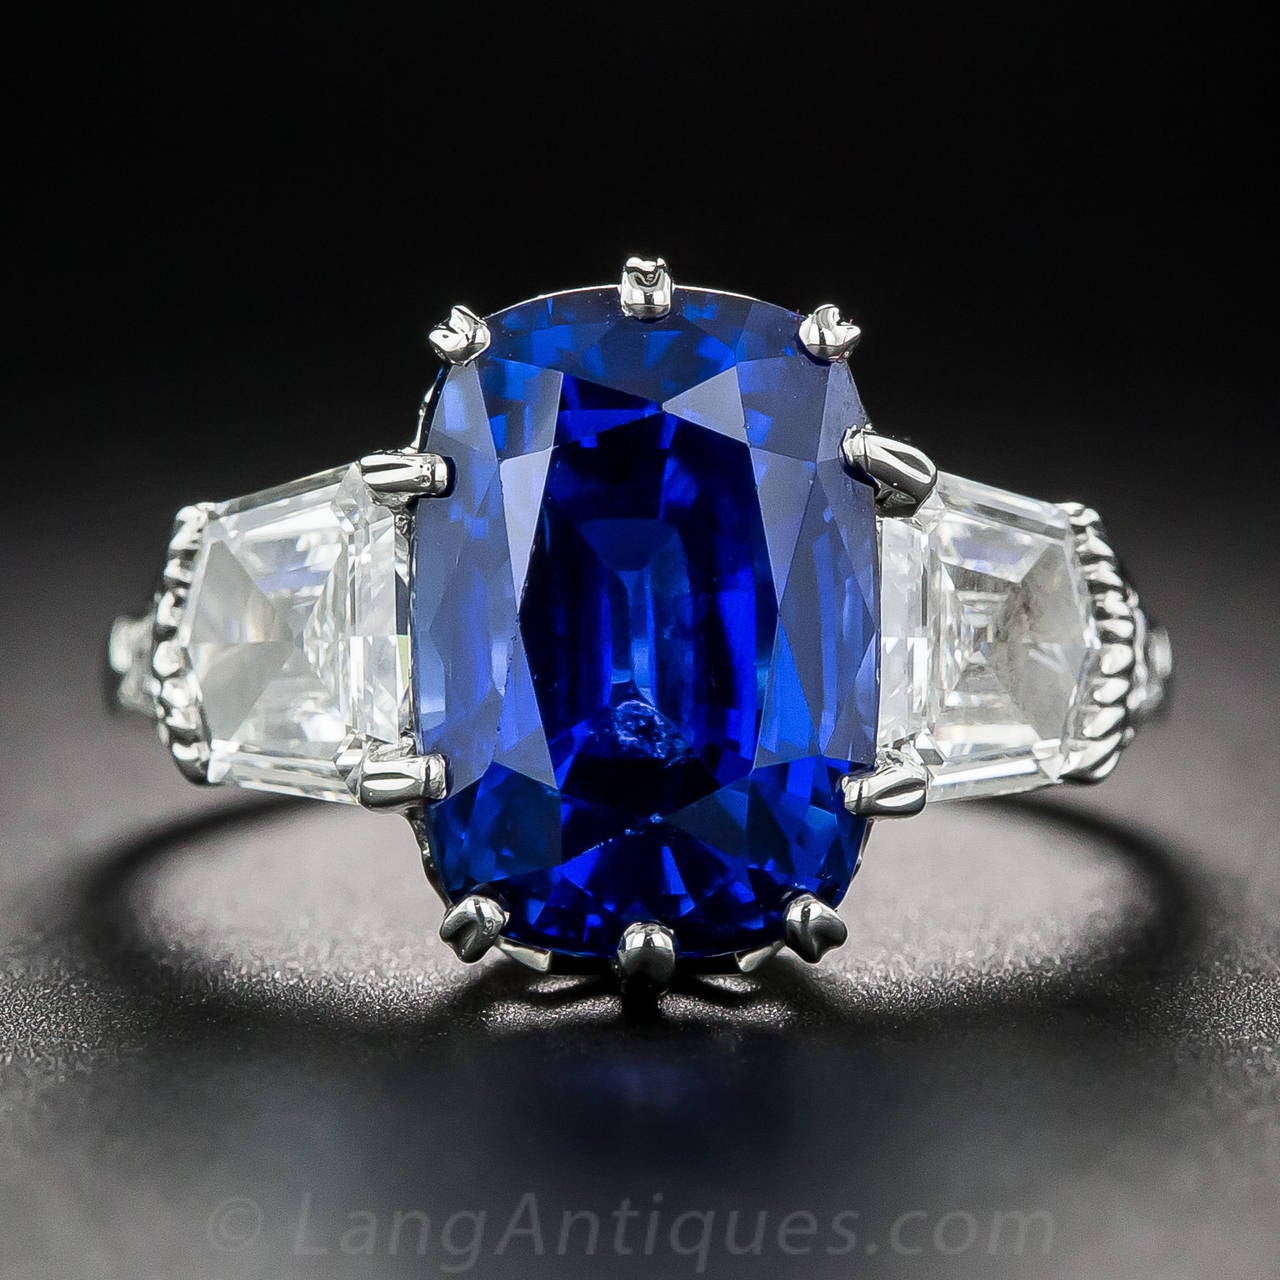 Natural sapphires this big, beautiful and radiant blue are a rare find, and this 7.18 carat stunner is naturally impressive and breathtaking with no heat treatment. Two crisp epaulette-cut white diamonds, together totaling just over one carat,